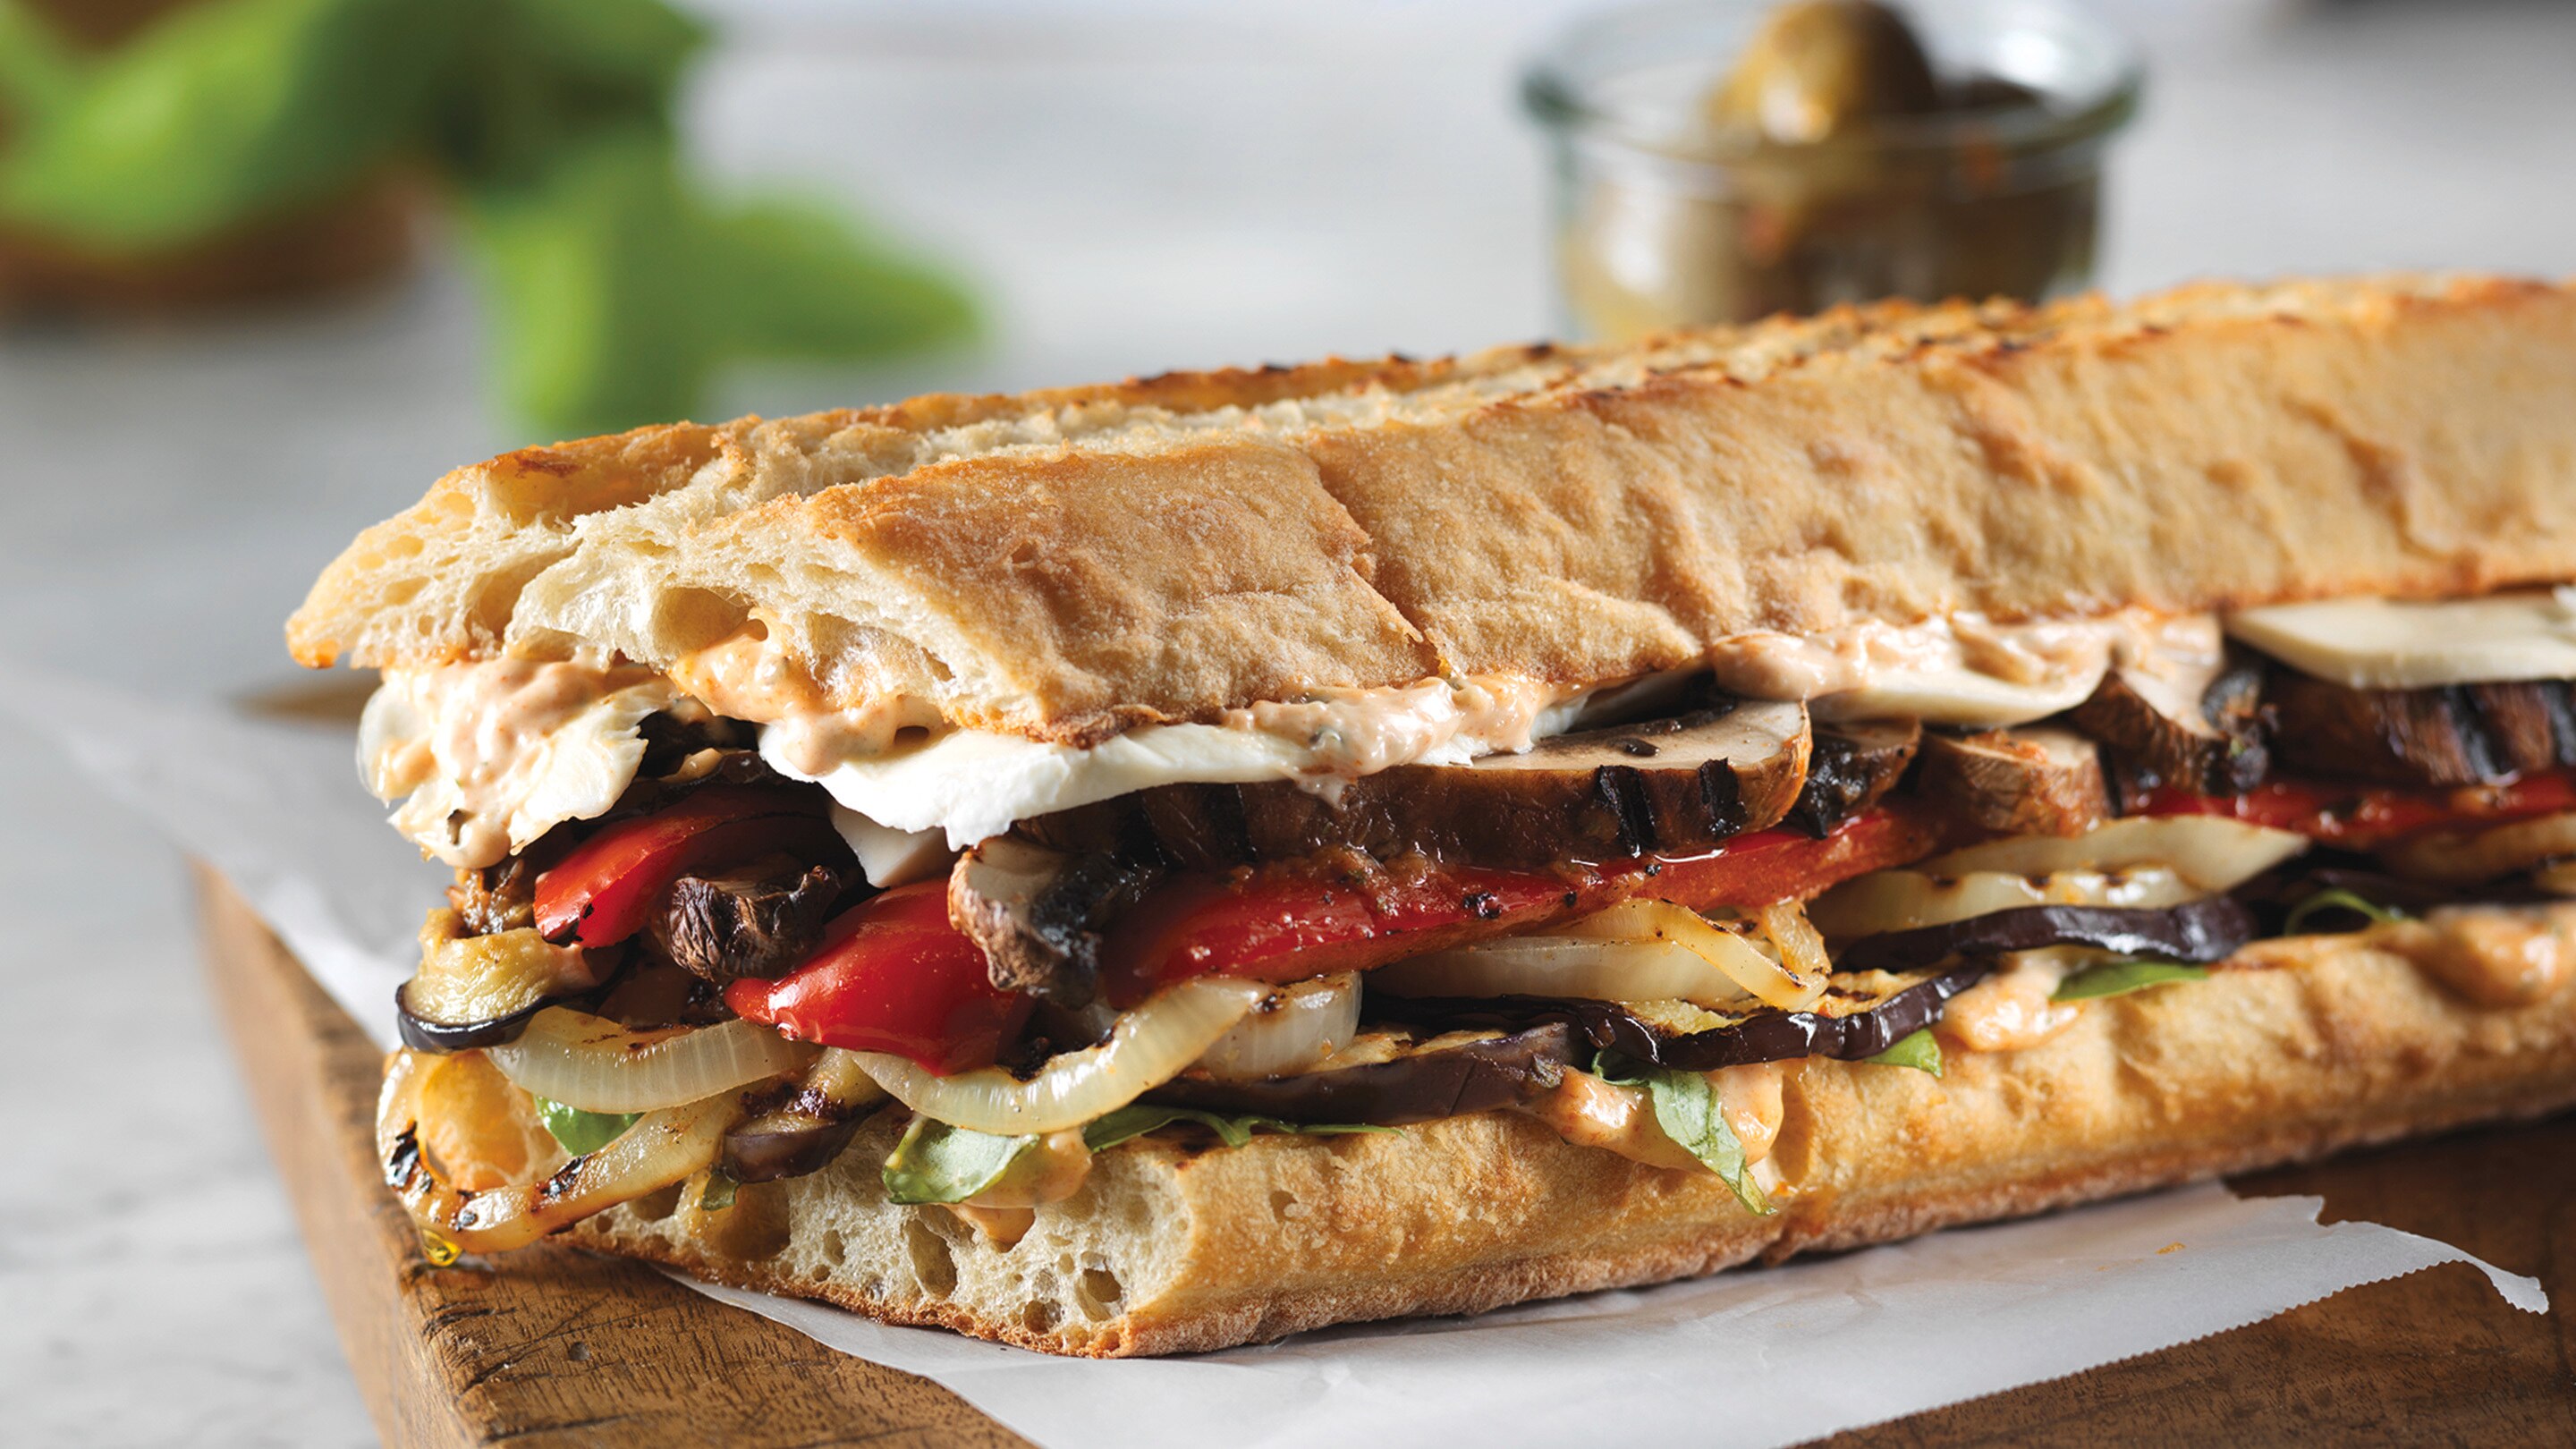 Bagette sandwich with layers of grilled vegetables and cheese